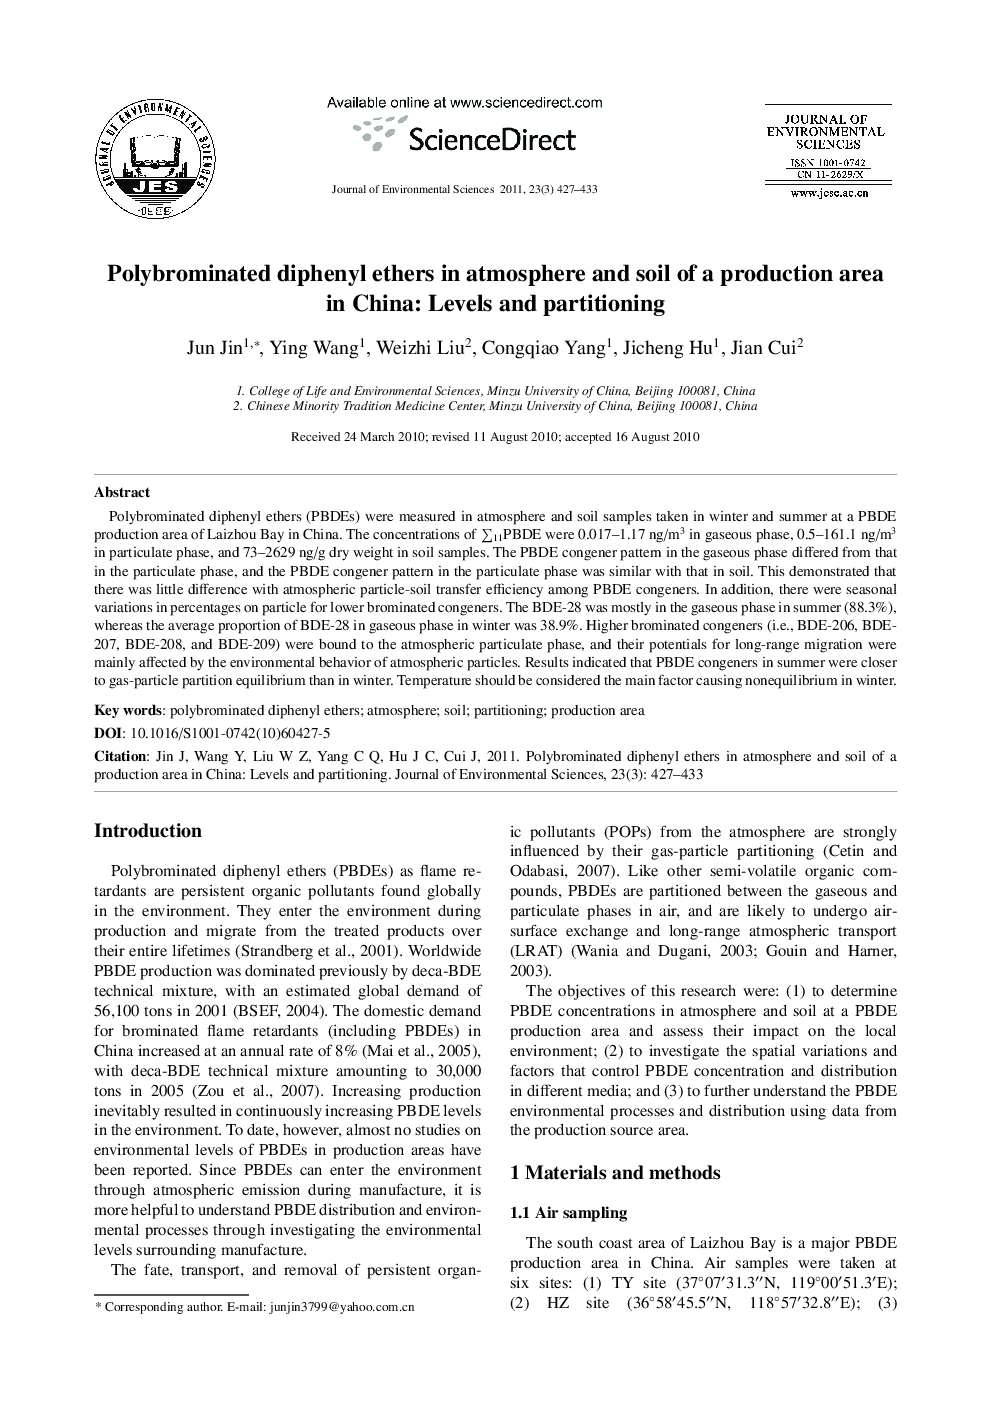 Polybrominated diphenyl ethers in atmosphere and soil of a production area in China: Levels and partitioning